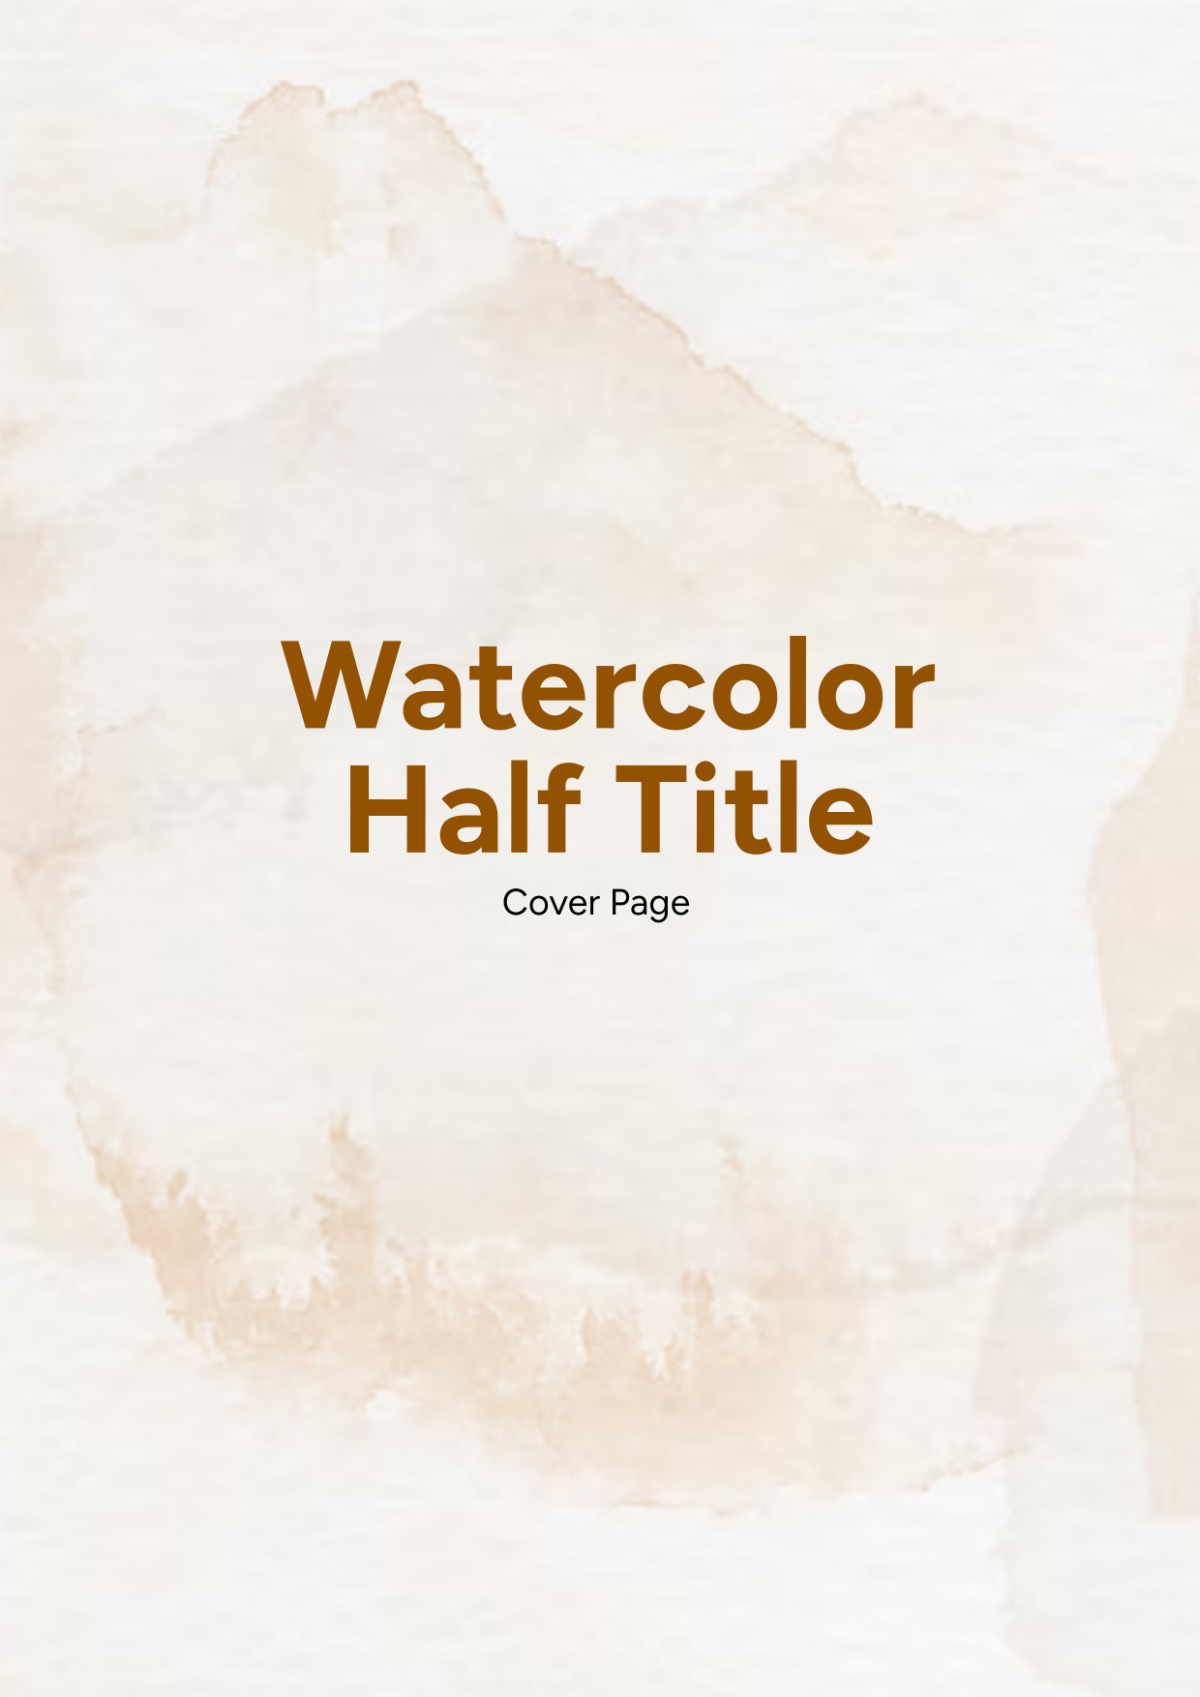 Watercolor Half Title Cover Page Template